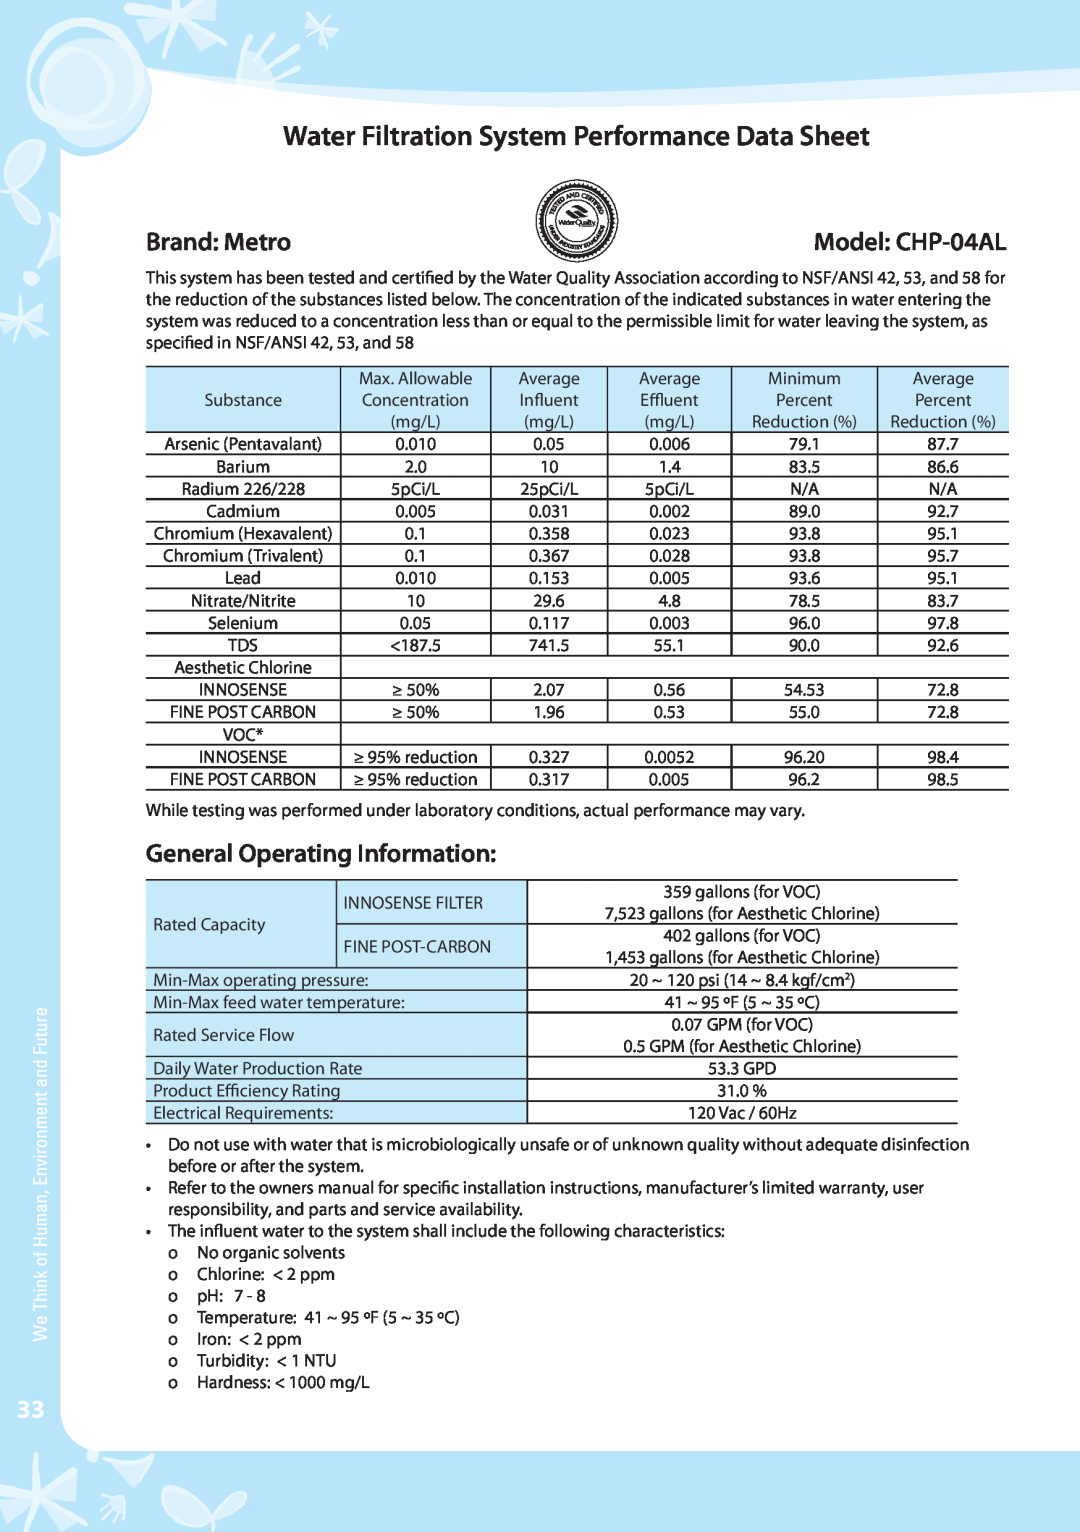 Coway CHP-04AU Model CHP-04AL, Water Filtration System Performance Data Sheet, Brand Metro, General Operating Information 